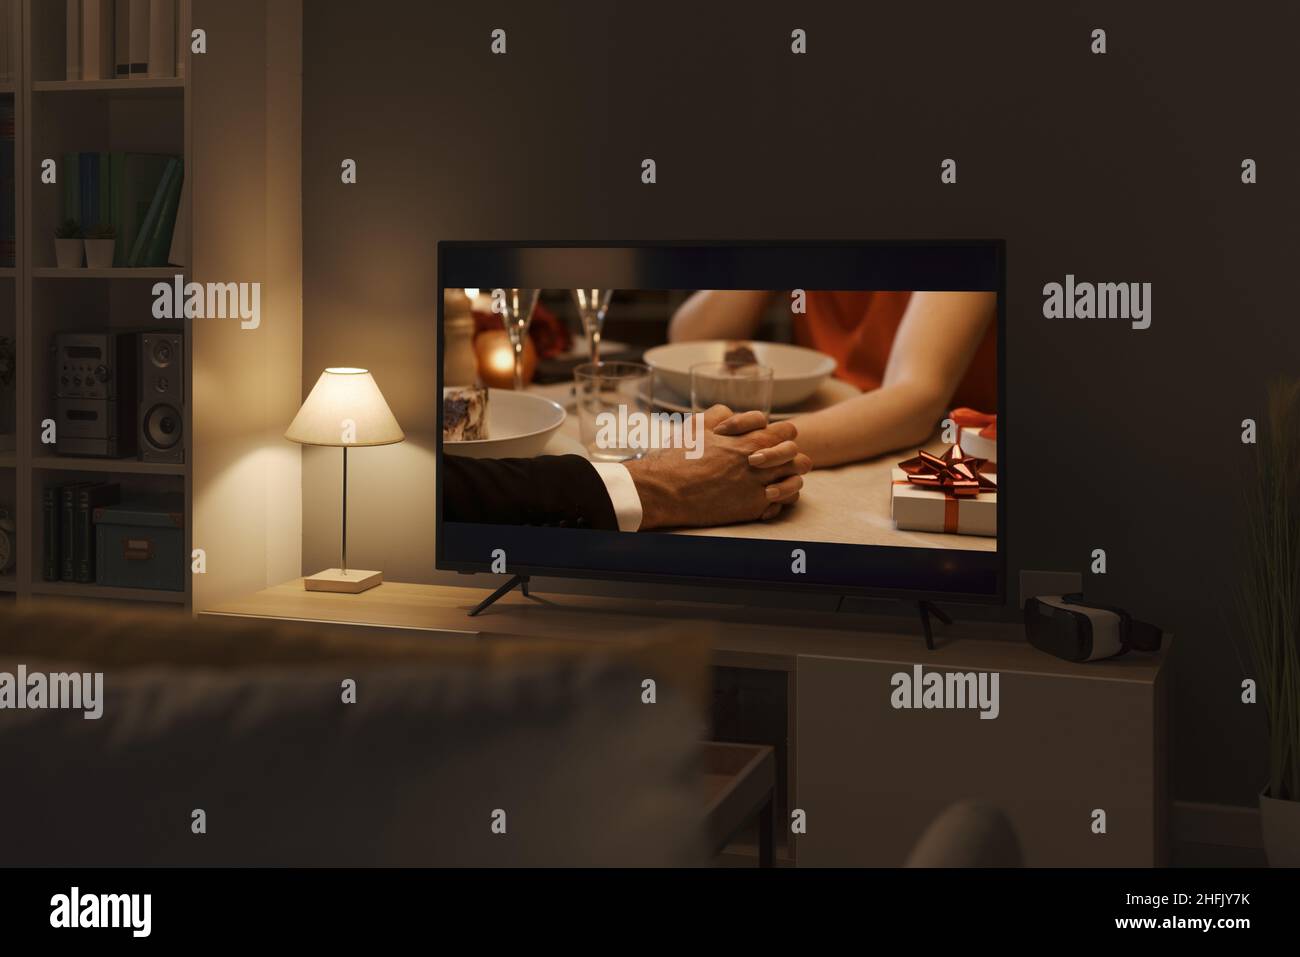 Romantic comedy movie streaming on TV and living room interior Stock Photo